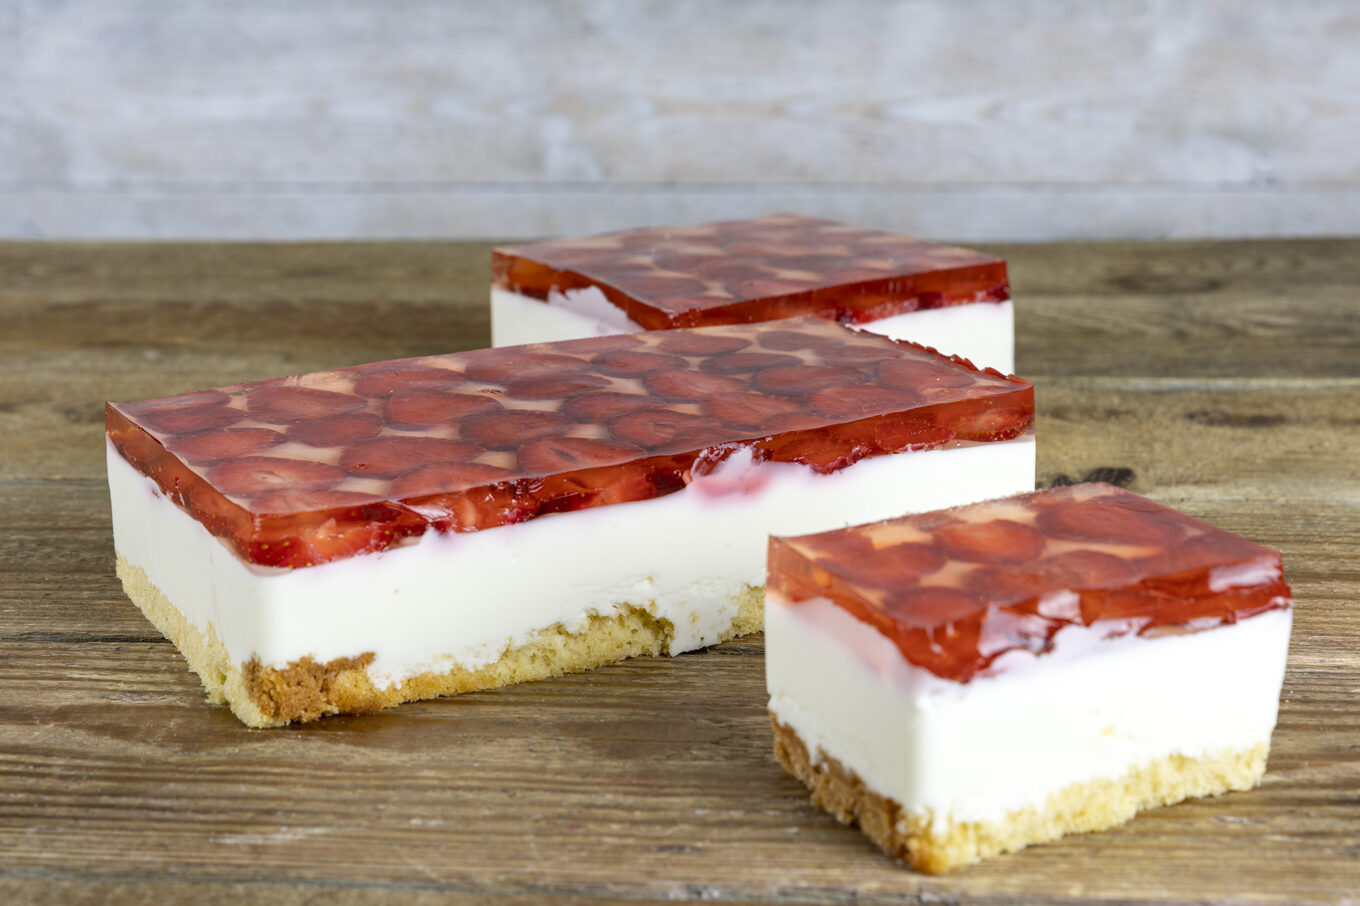 Cold cheesecake with strawberries and jelly3. Jacek Placek confectionery is synonymous with the taste of homemade cakes made from natural products.